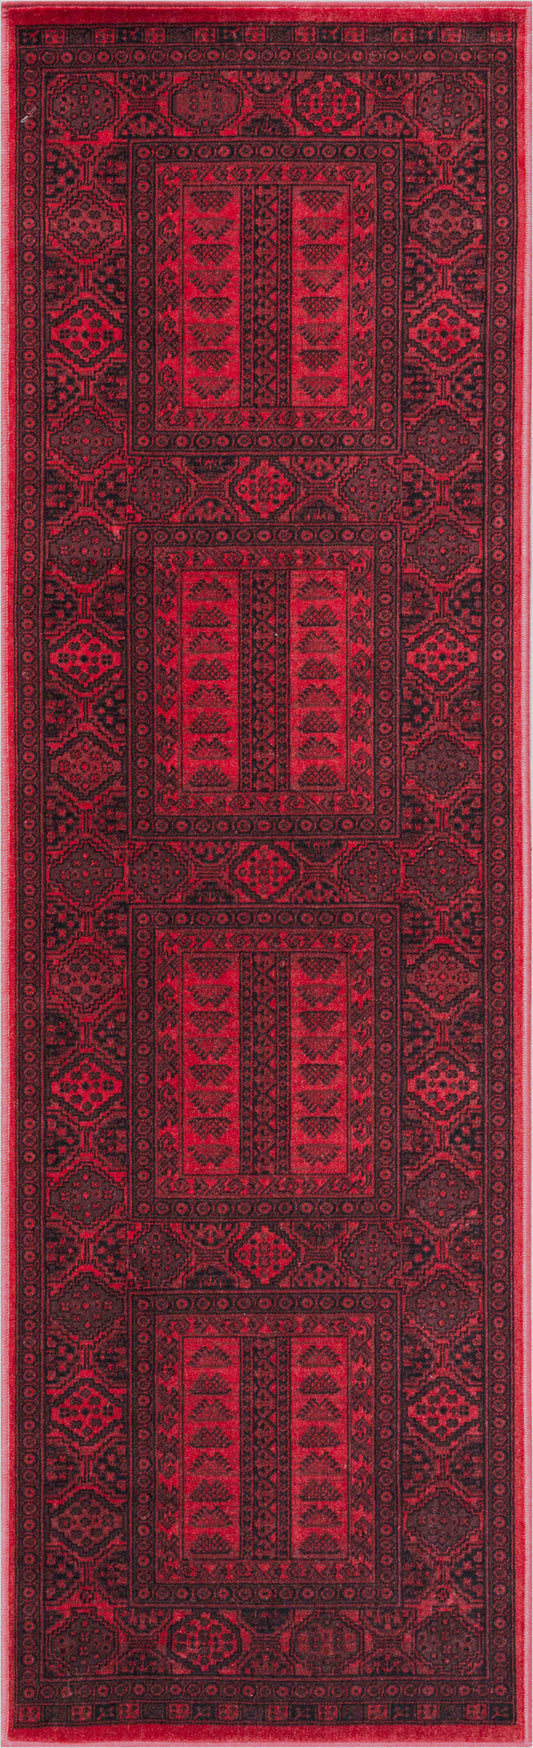 Alastair Red and Black Viscose Area Rug 2x7